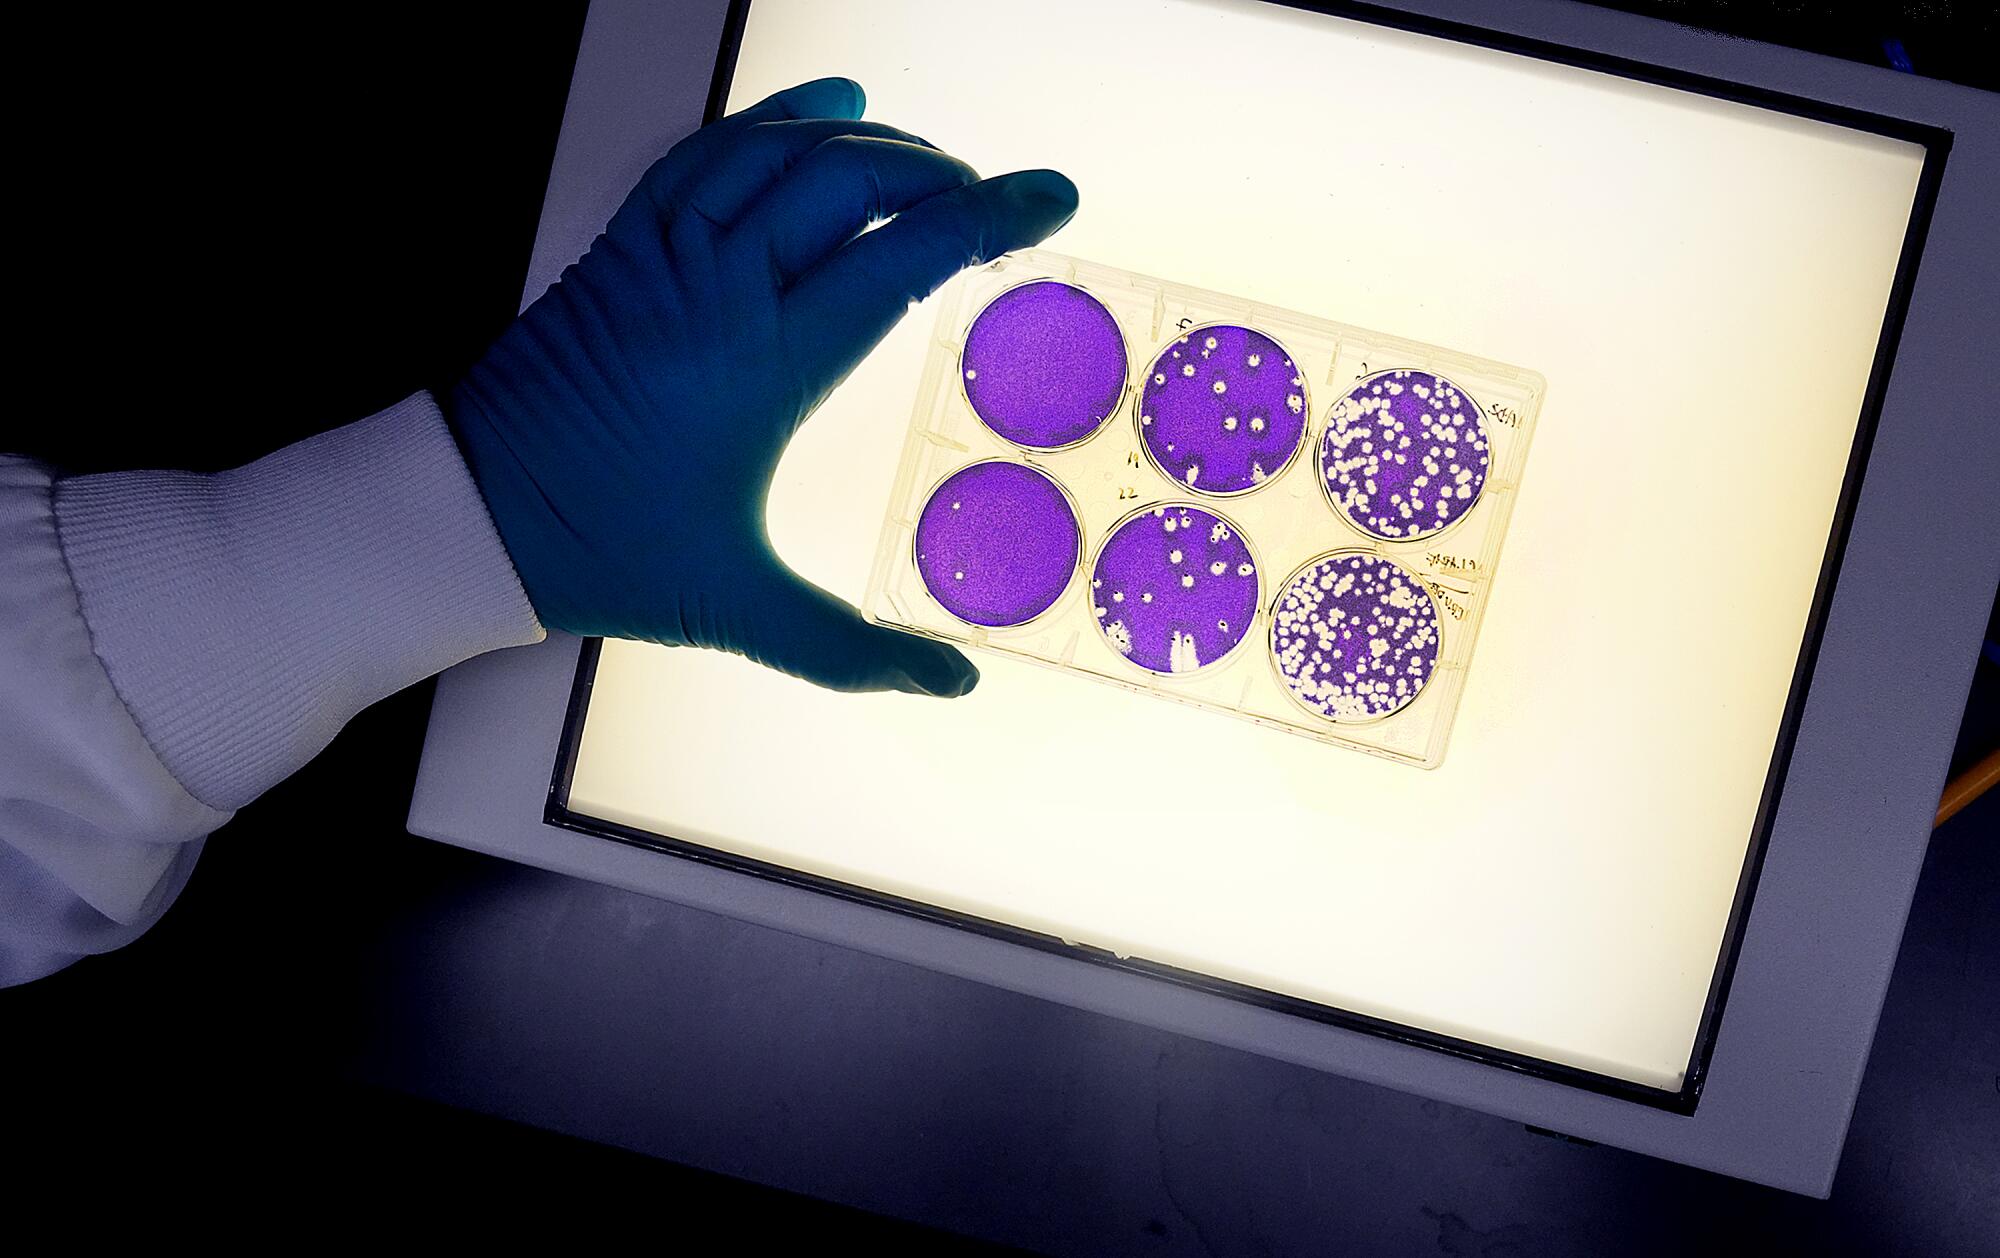 Lab samples are shown on a light table.